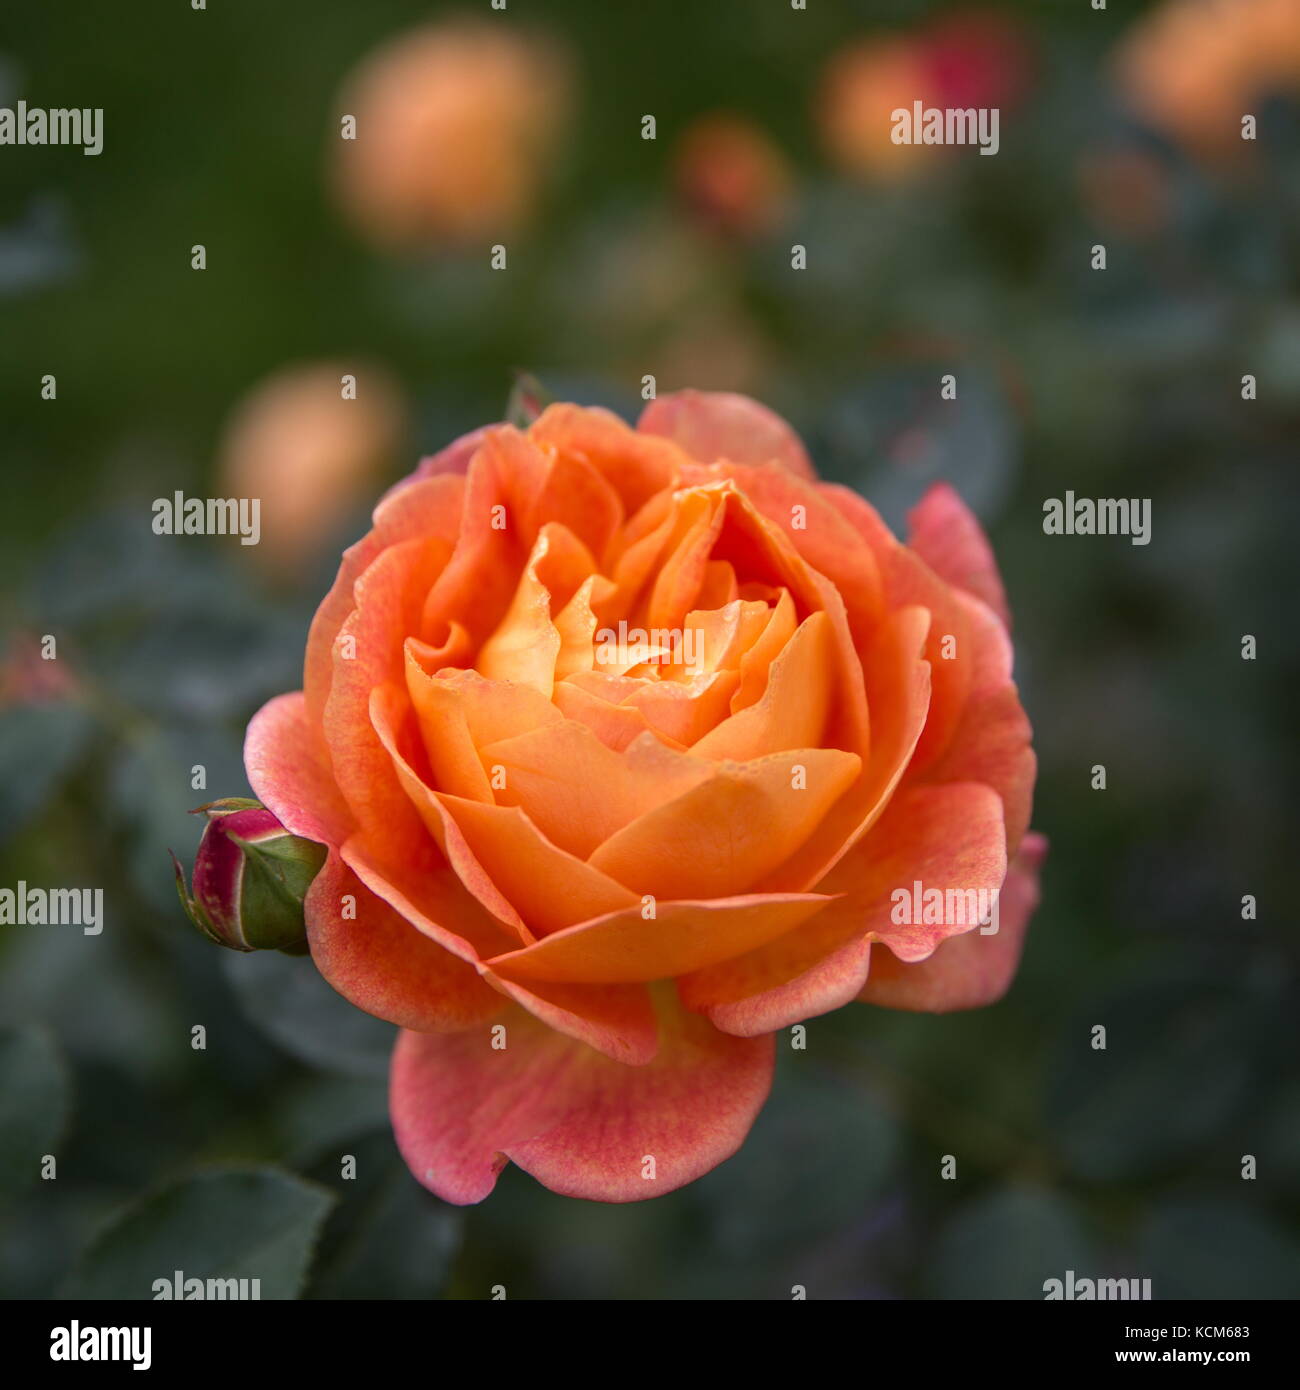 Blooming orange English rose in the garden on a sunny day. David Austin Rose Stock Photo